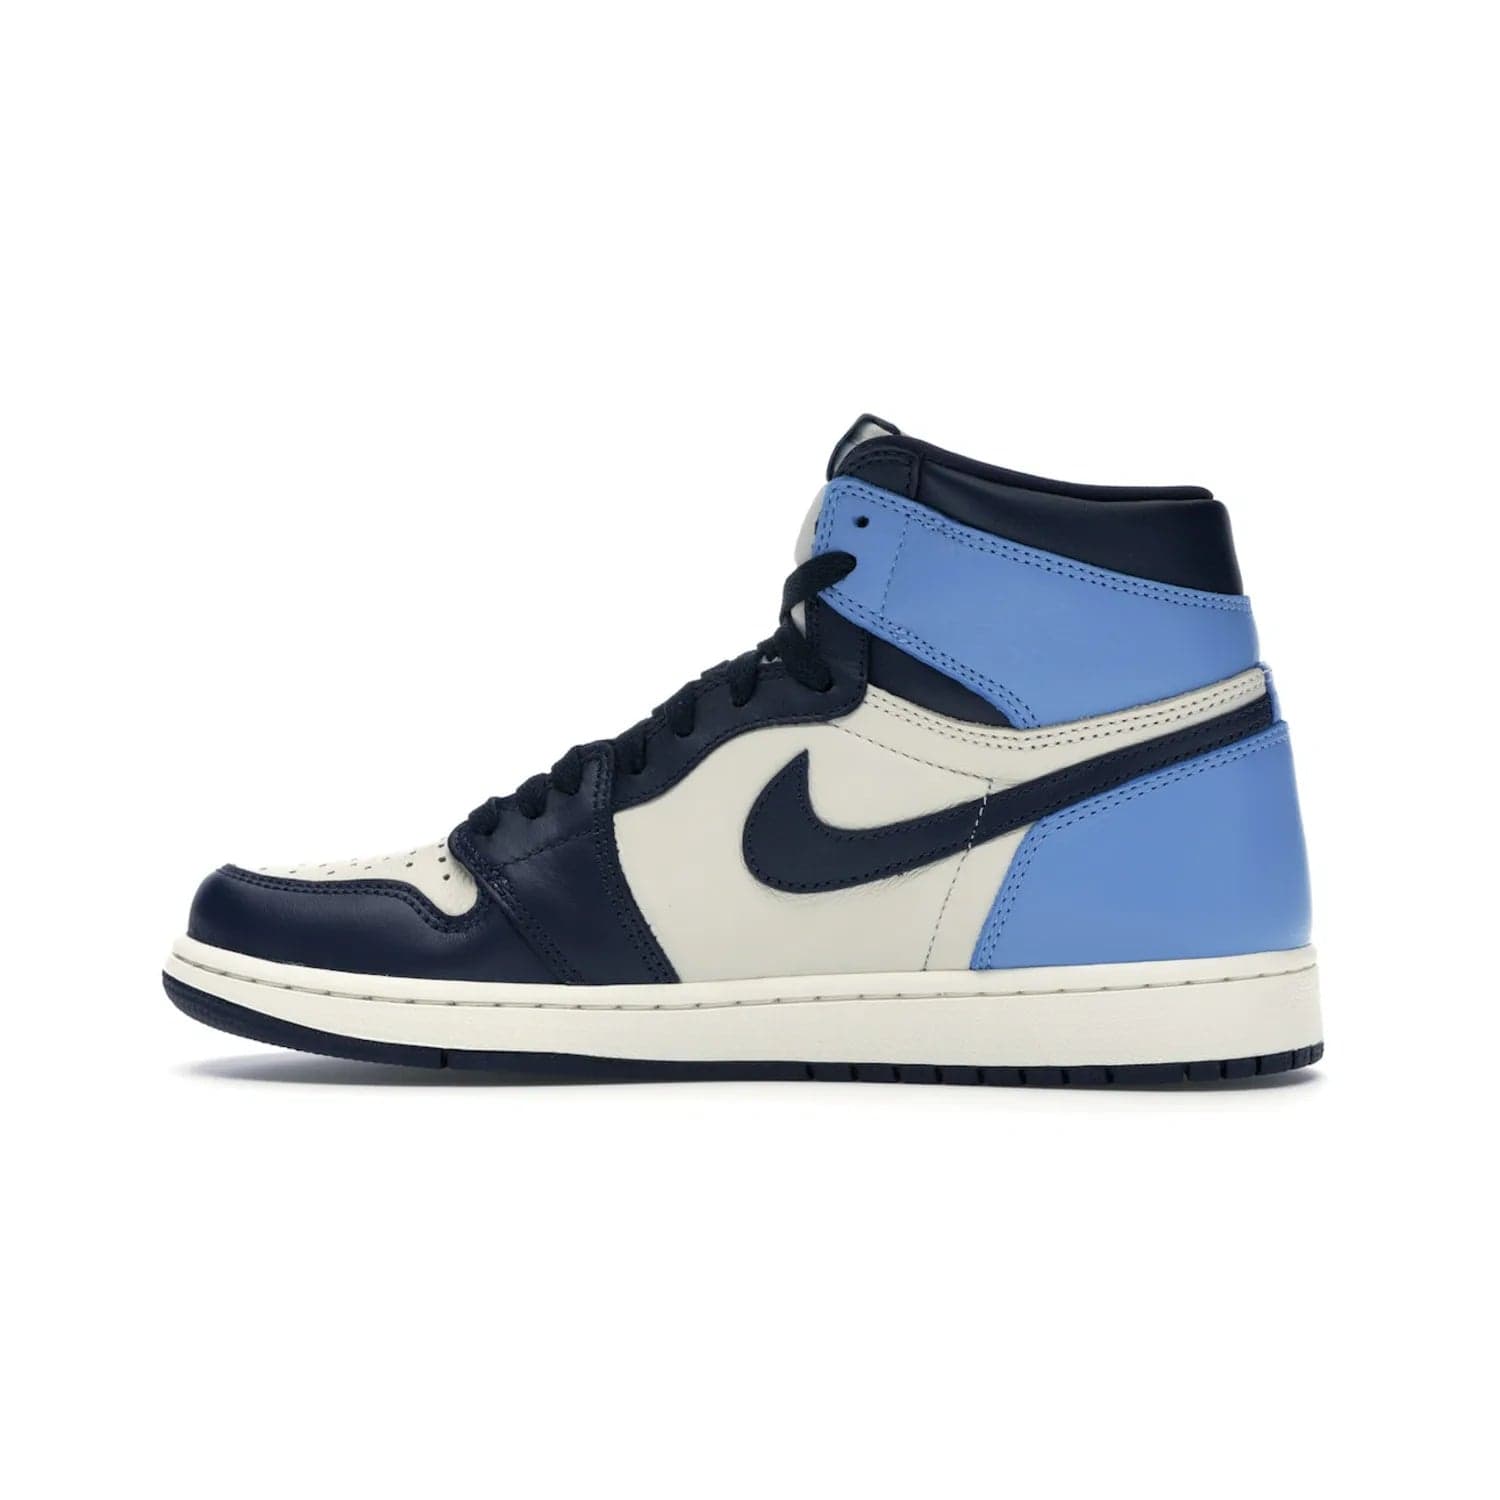 Jordan 1 Retro High Obsidian UNC - Image 20 - Only at www.BallersClubKickz.com - Bring a timeless classic to your wardrobe with the Air Jordan 1 Retro High "Obsidian/University Blue”. A full leather upper combines Obsidian and University Blue detailing for a retro Jordan style. Stitched Jumpman logo pays tribute to UNC. Experience classic style with a timeless sneaker.